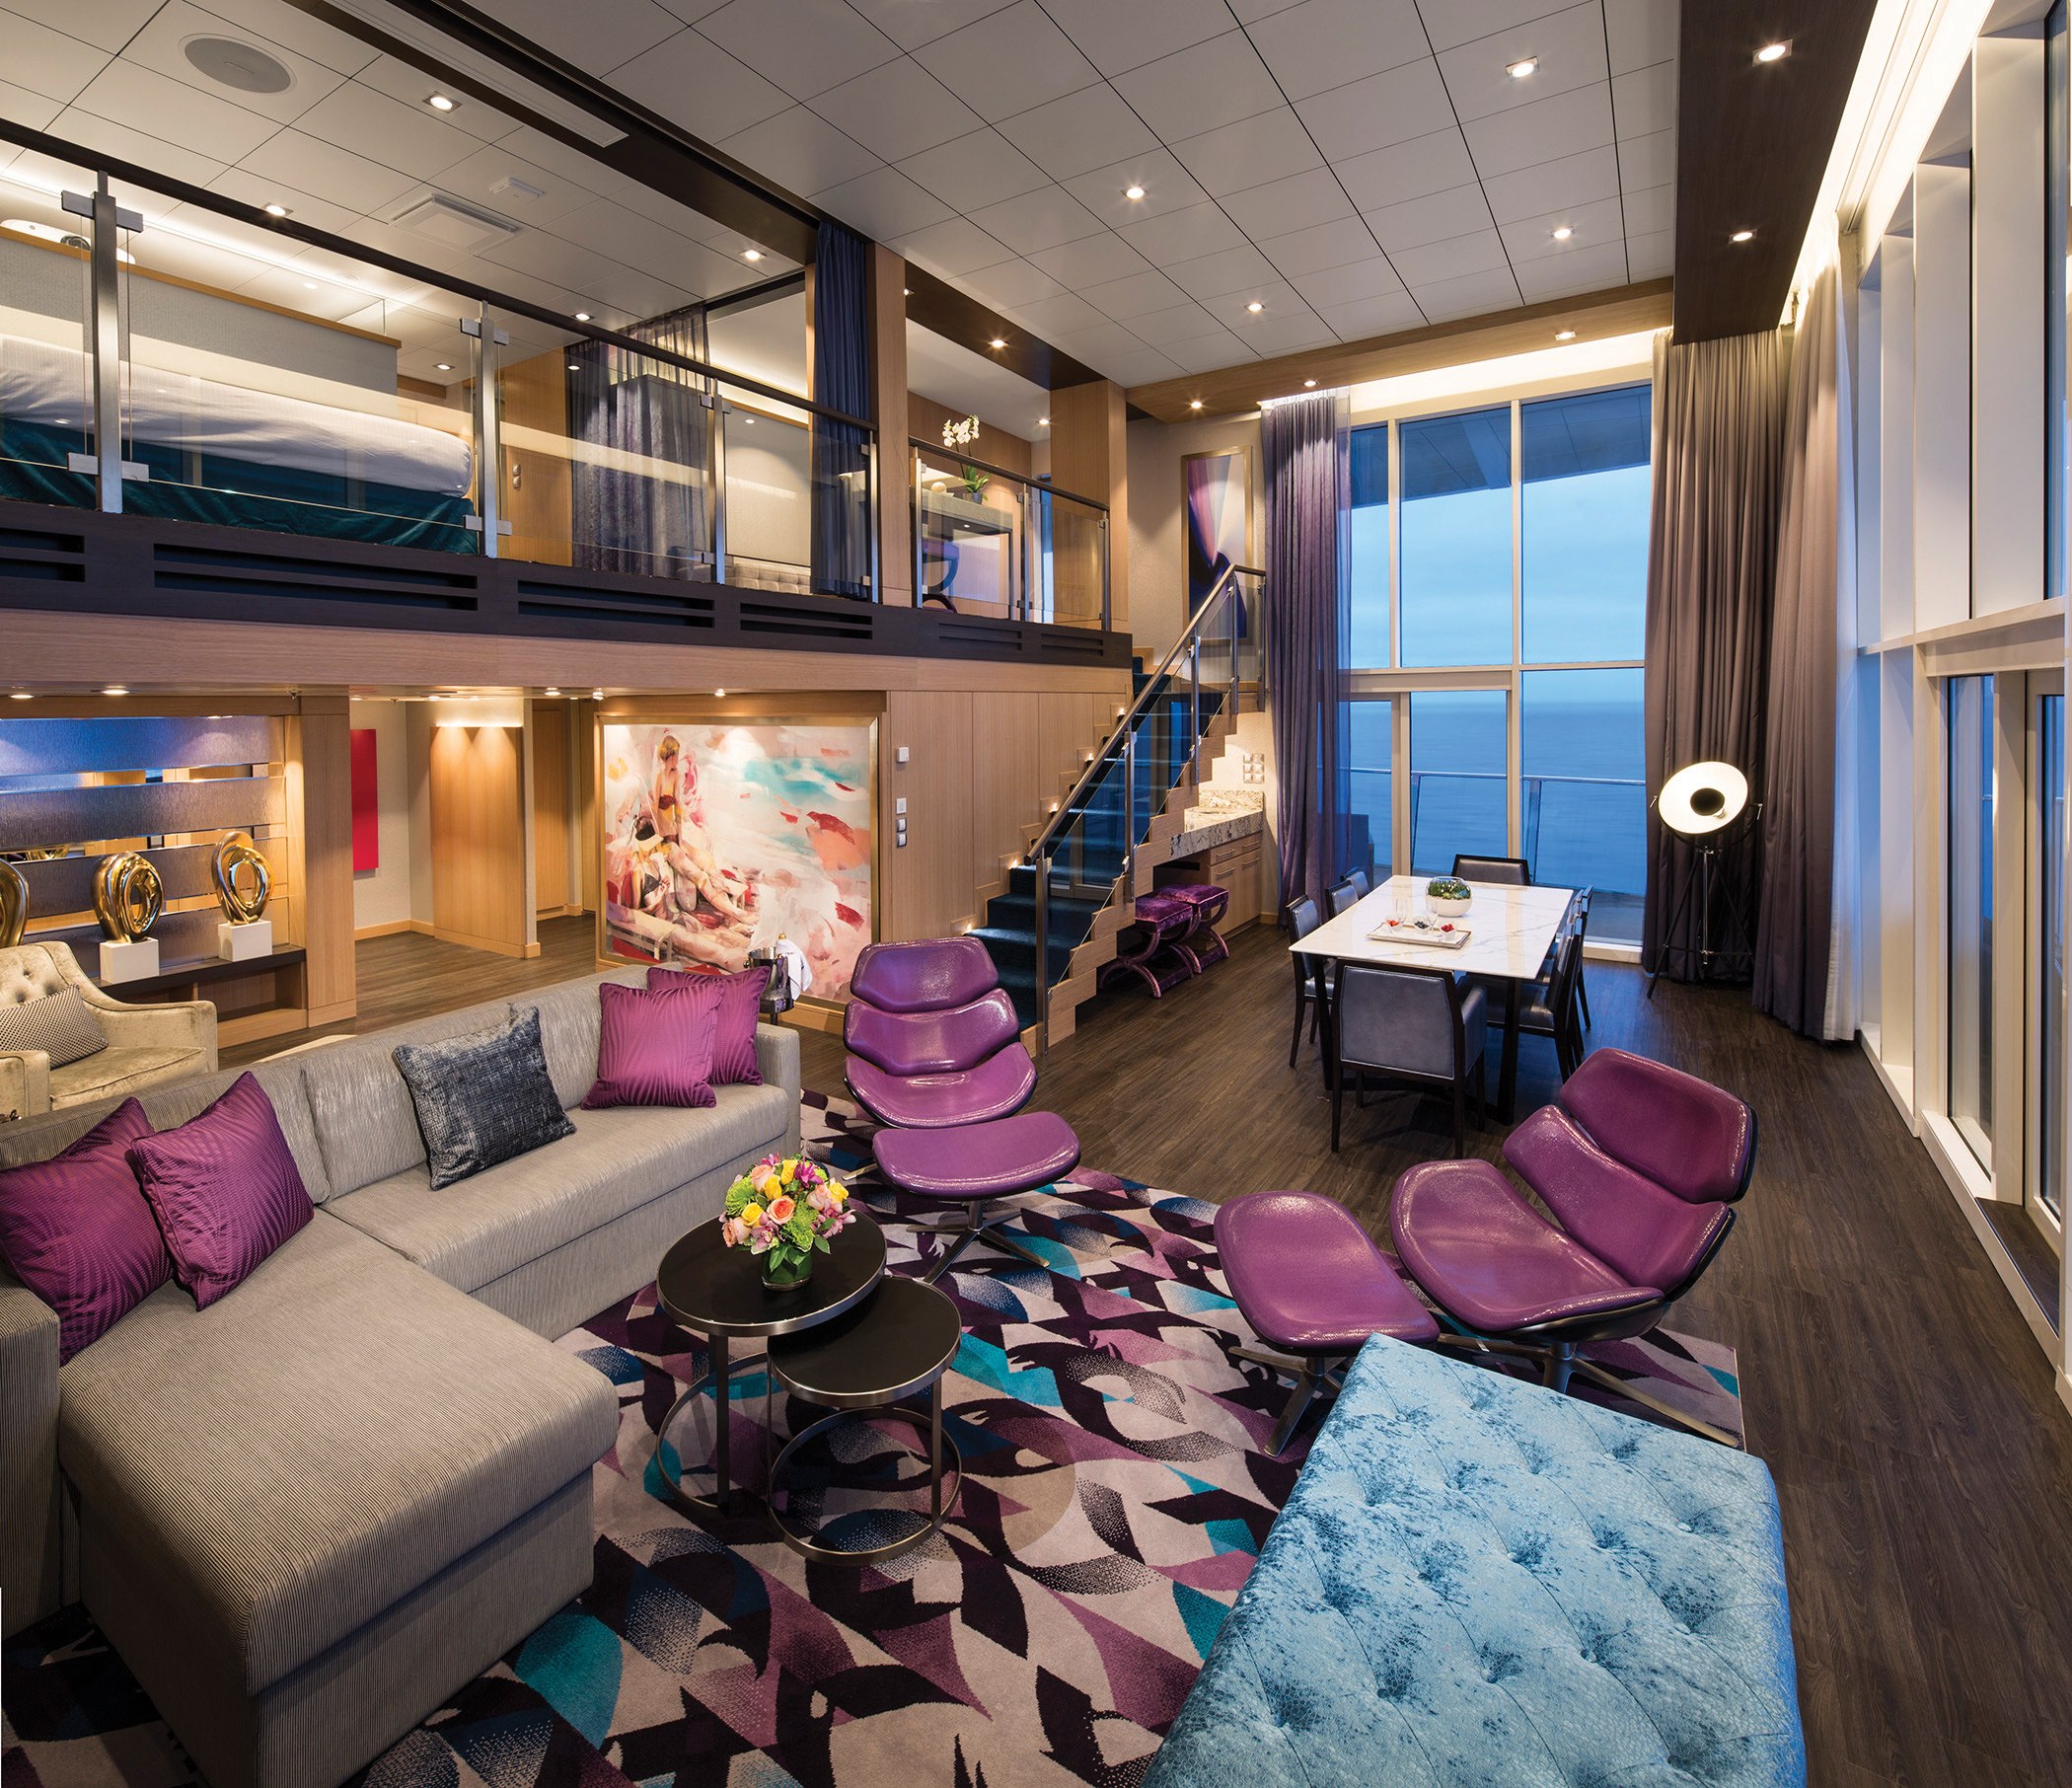 Harmony of the Seas' 2-deck-high suites